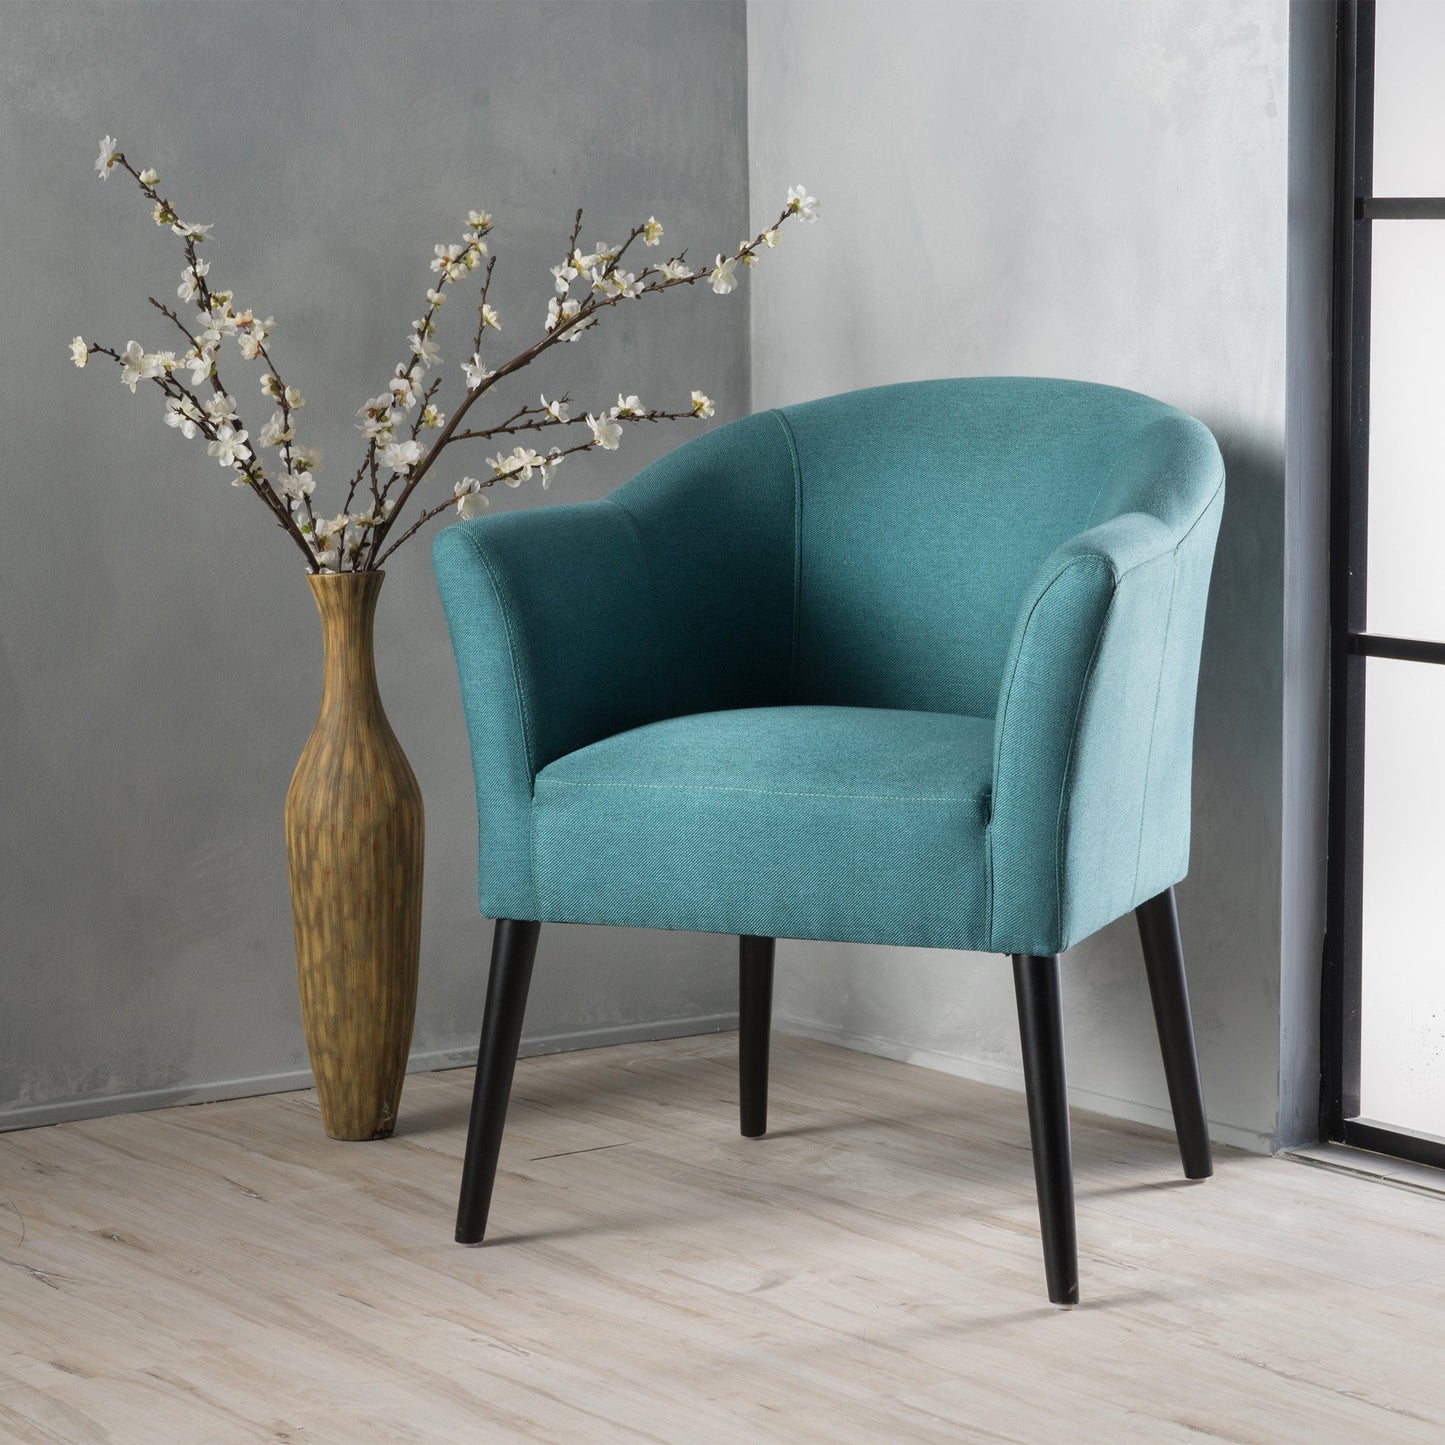 Charmaine Mid-Century Modern Low Back Fabric Accent Chair with Tapered Legs